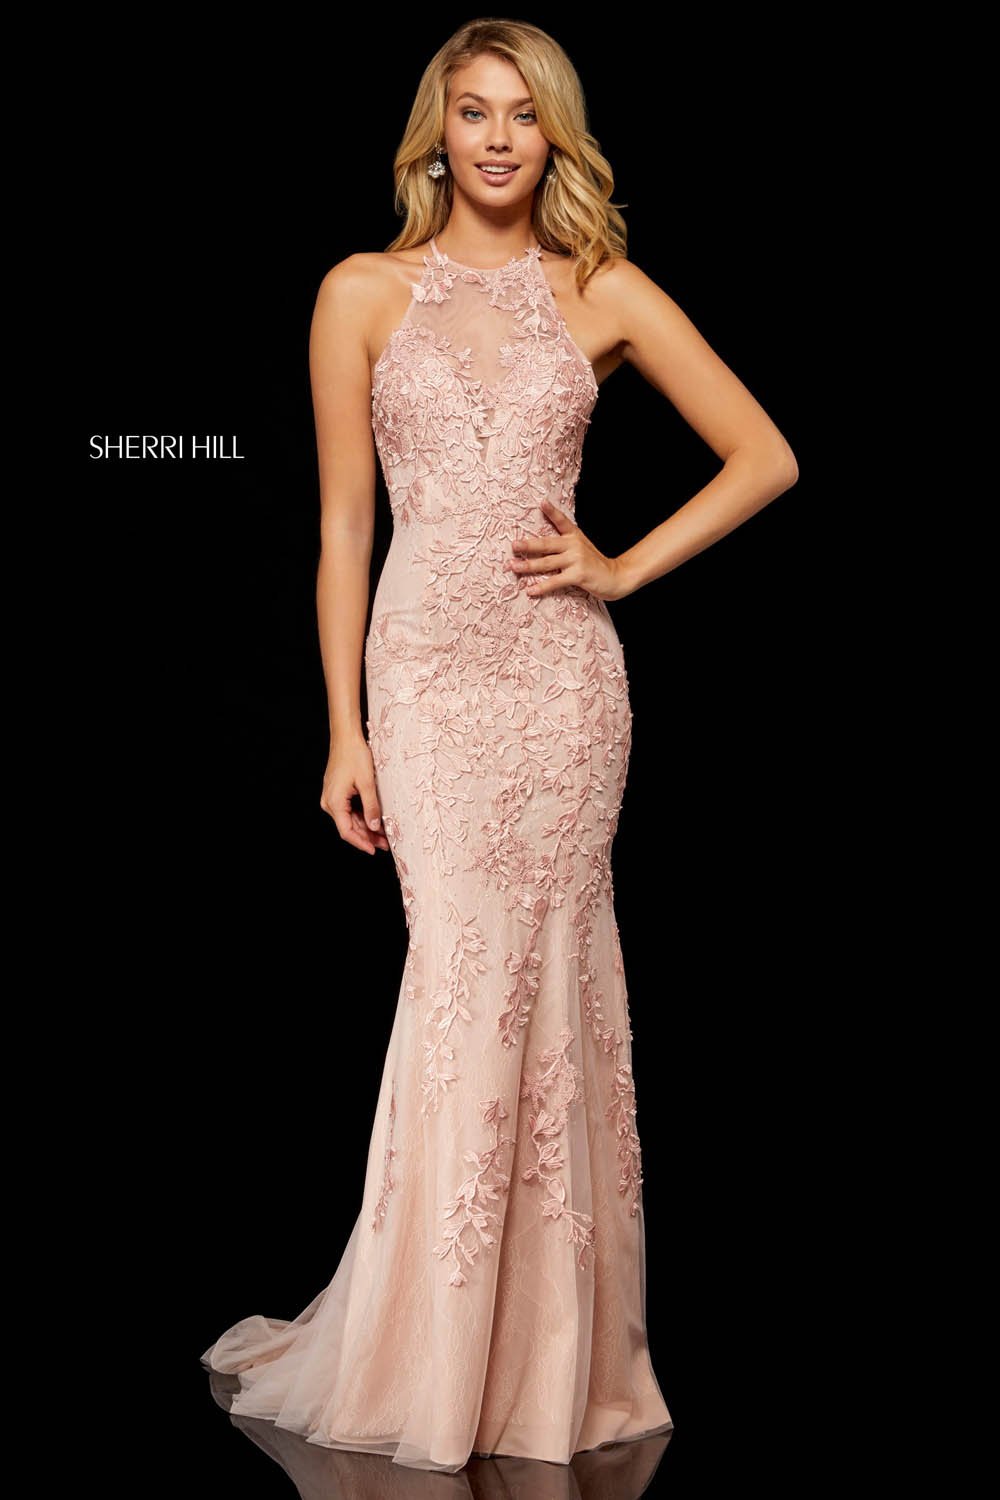 Sherri Hill 52160 dress images in these colors: Blush, Ivory.